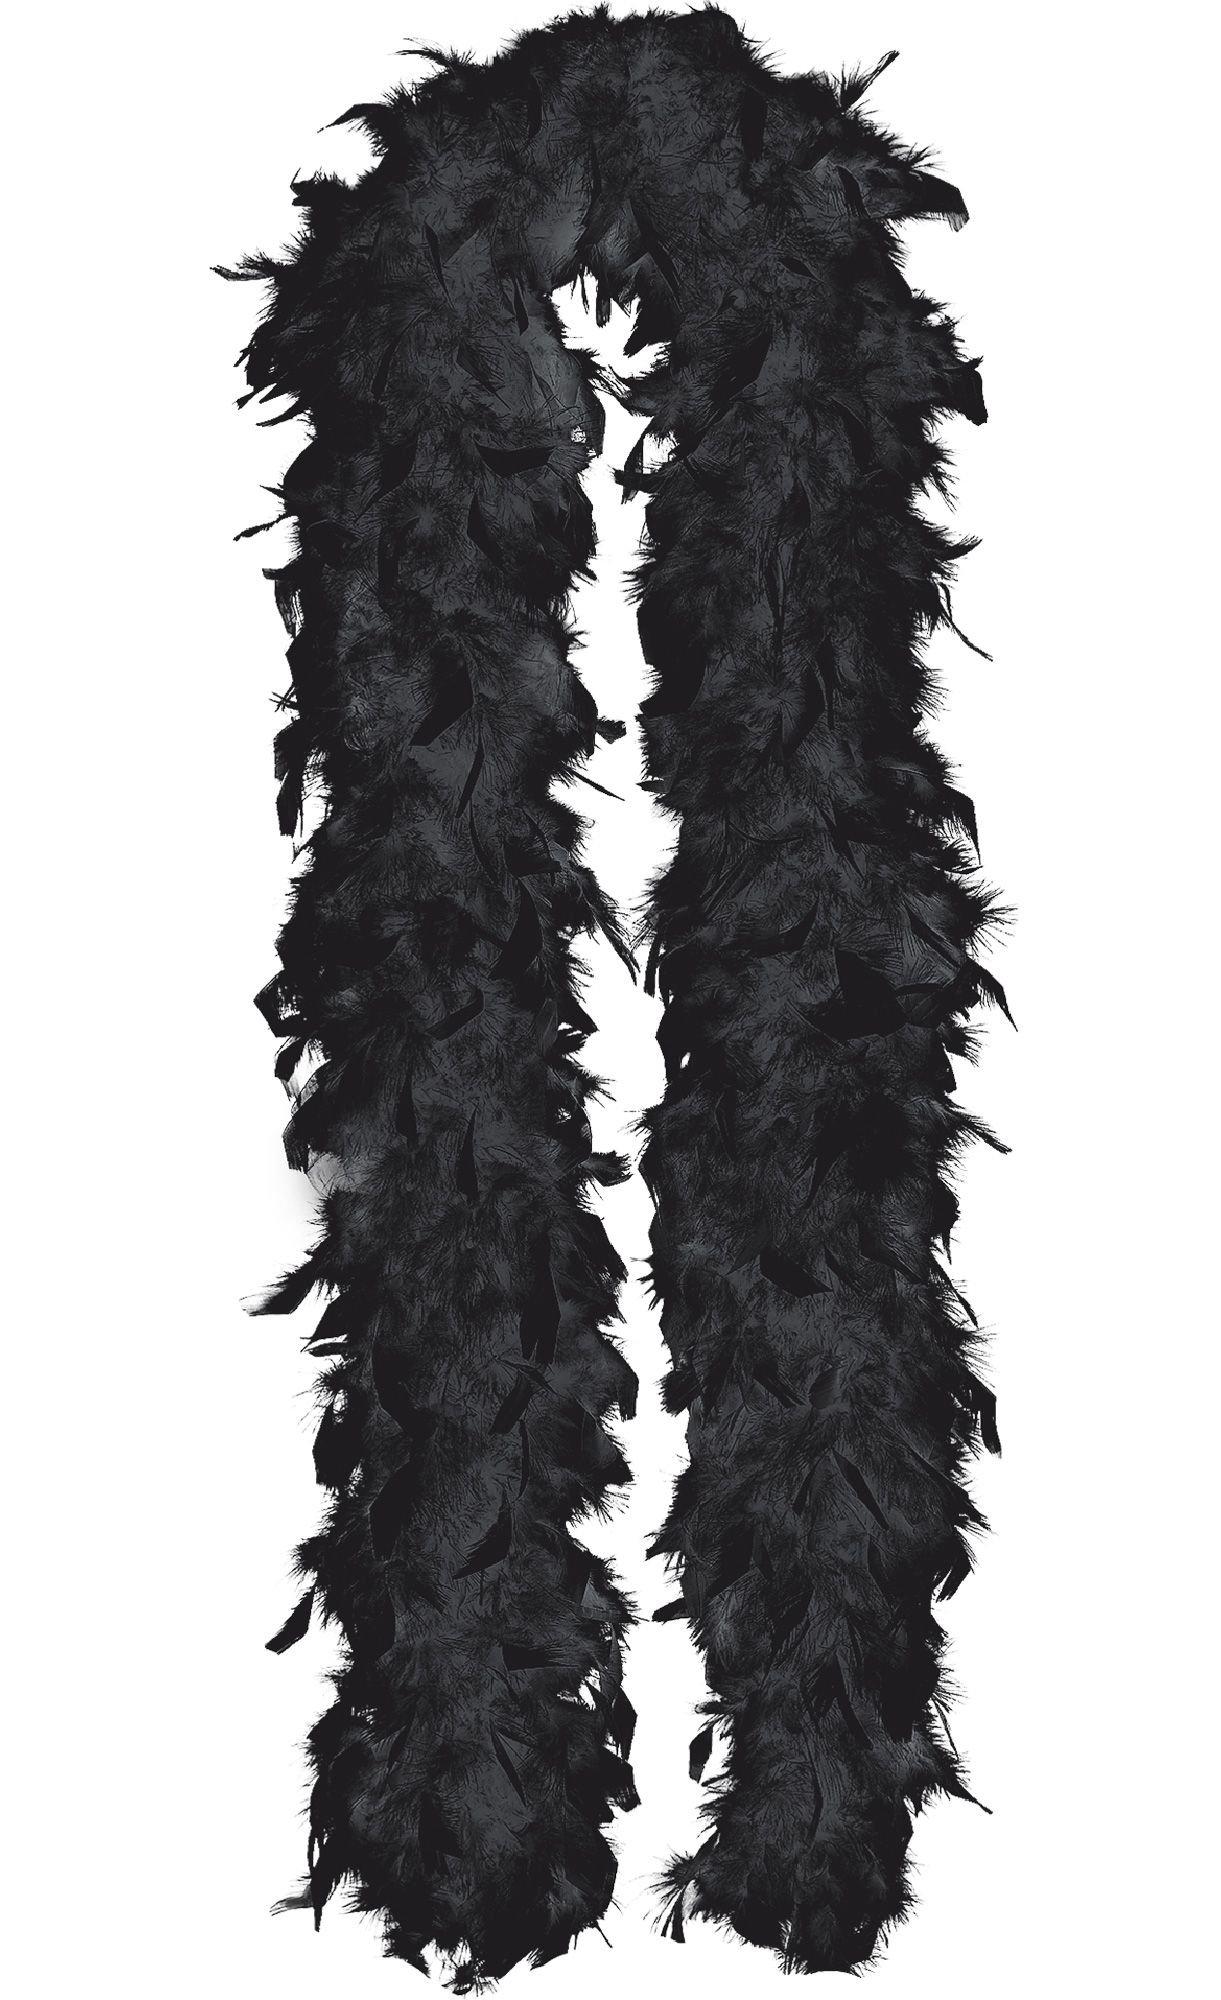 Burgundy 2 Ply Ostrich Feather Boa Boas Scarf Prom Halloween Costumes  Birthday Gifts Dancing Decorations Cynthia's Feathers SKU: 9N31 